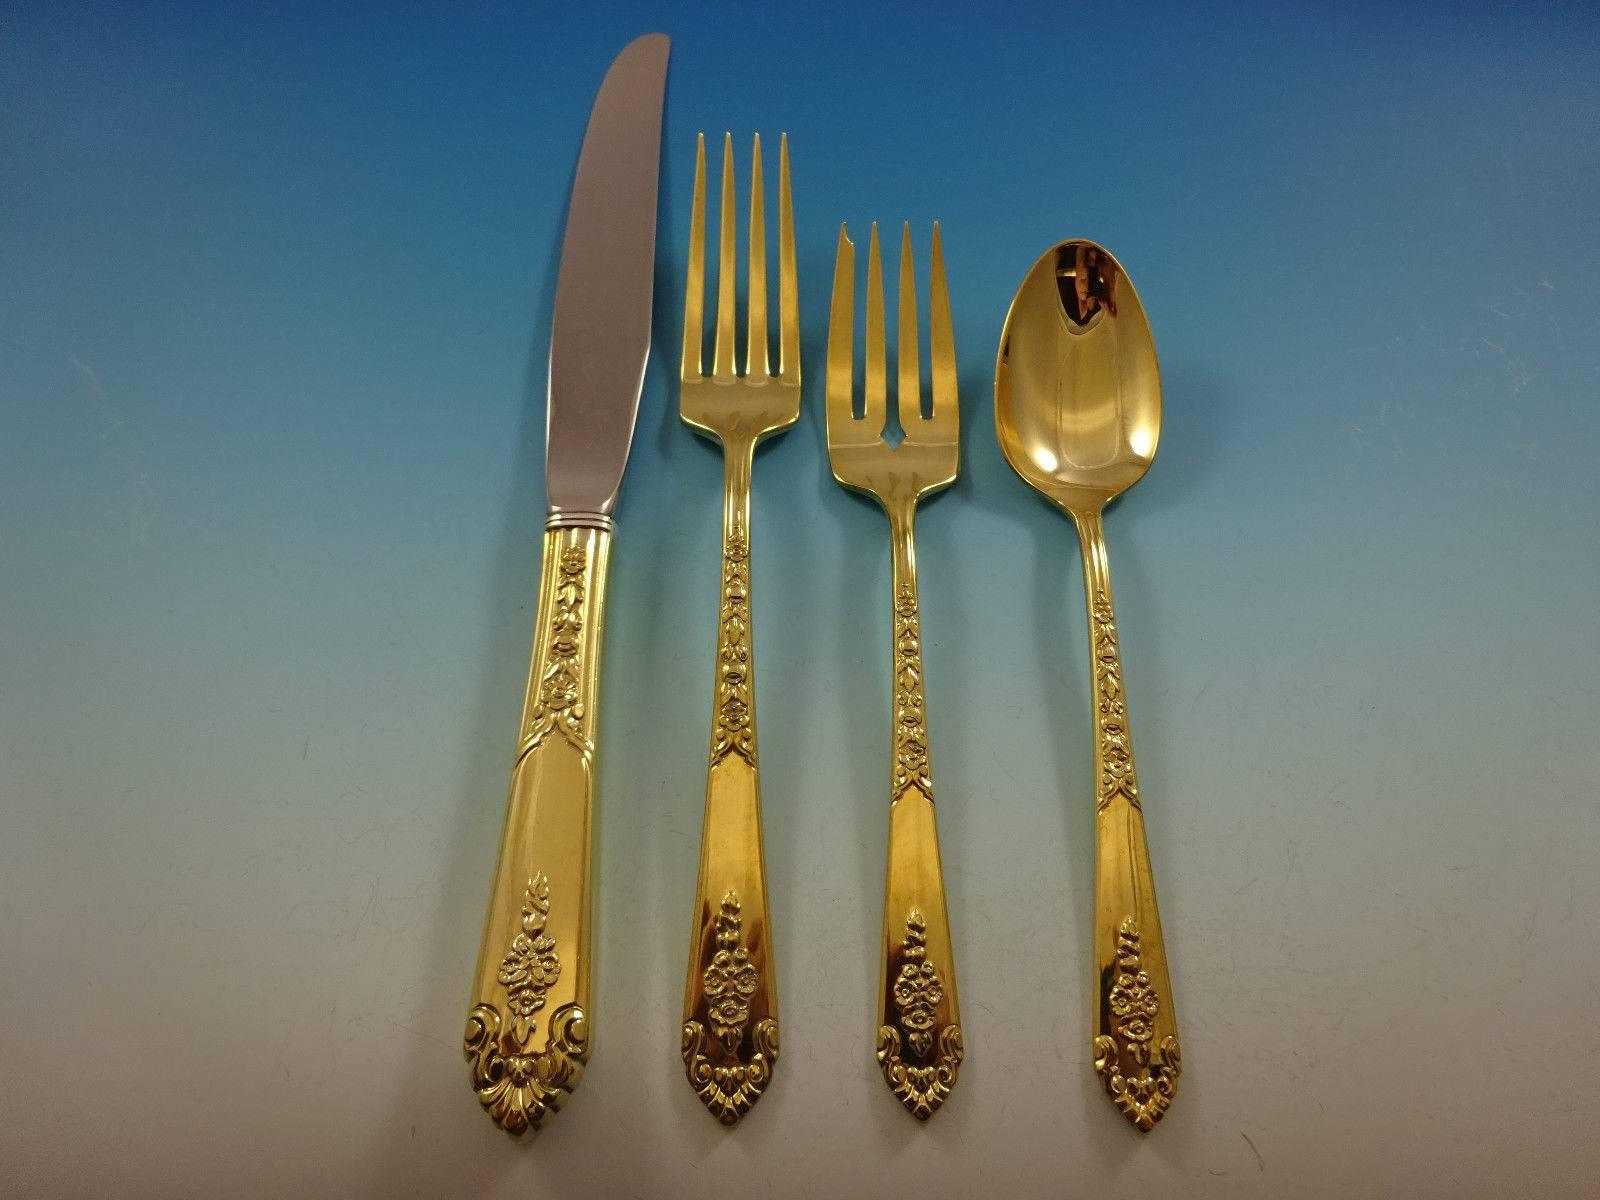 Add some luxe to your life with this fabulous promise gold by Royal Crest sterling silver flatware set, 48-piece. Gold flatware is on trend and makes a bold statement on your table. 

This set is vermeil (completely gold-washed) and includes:
 
12